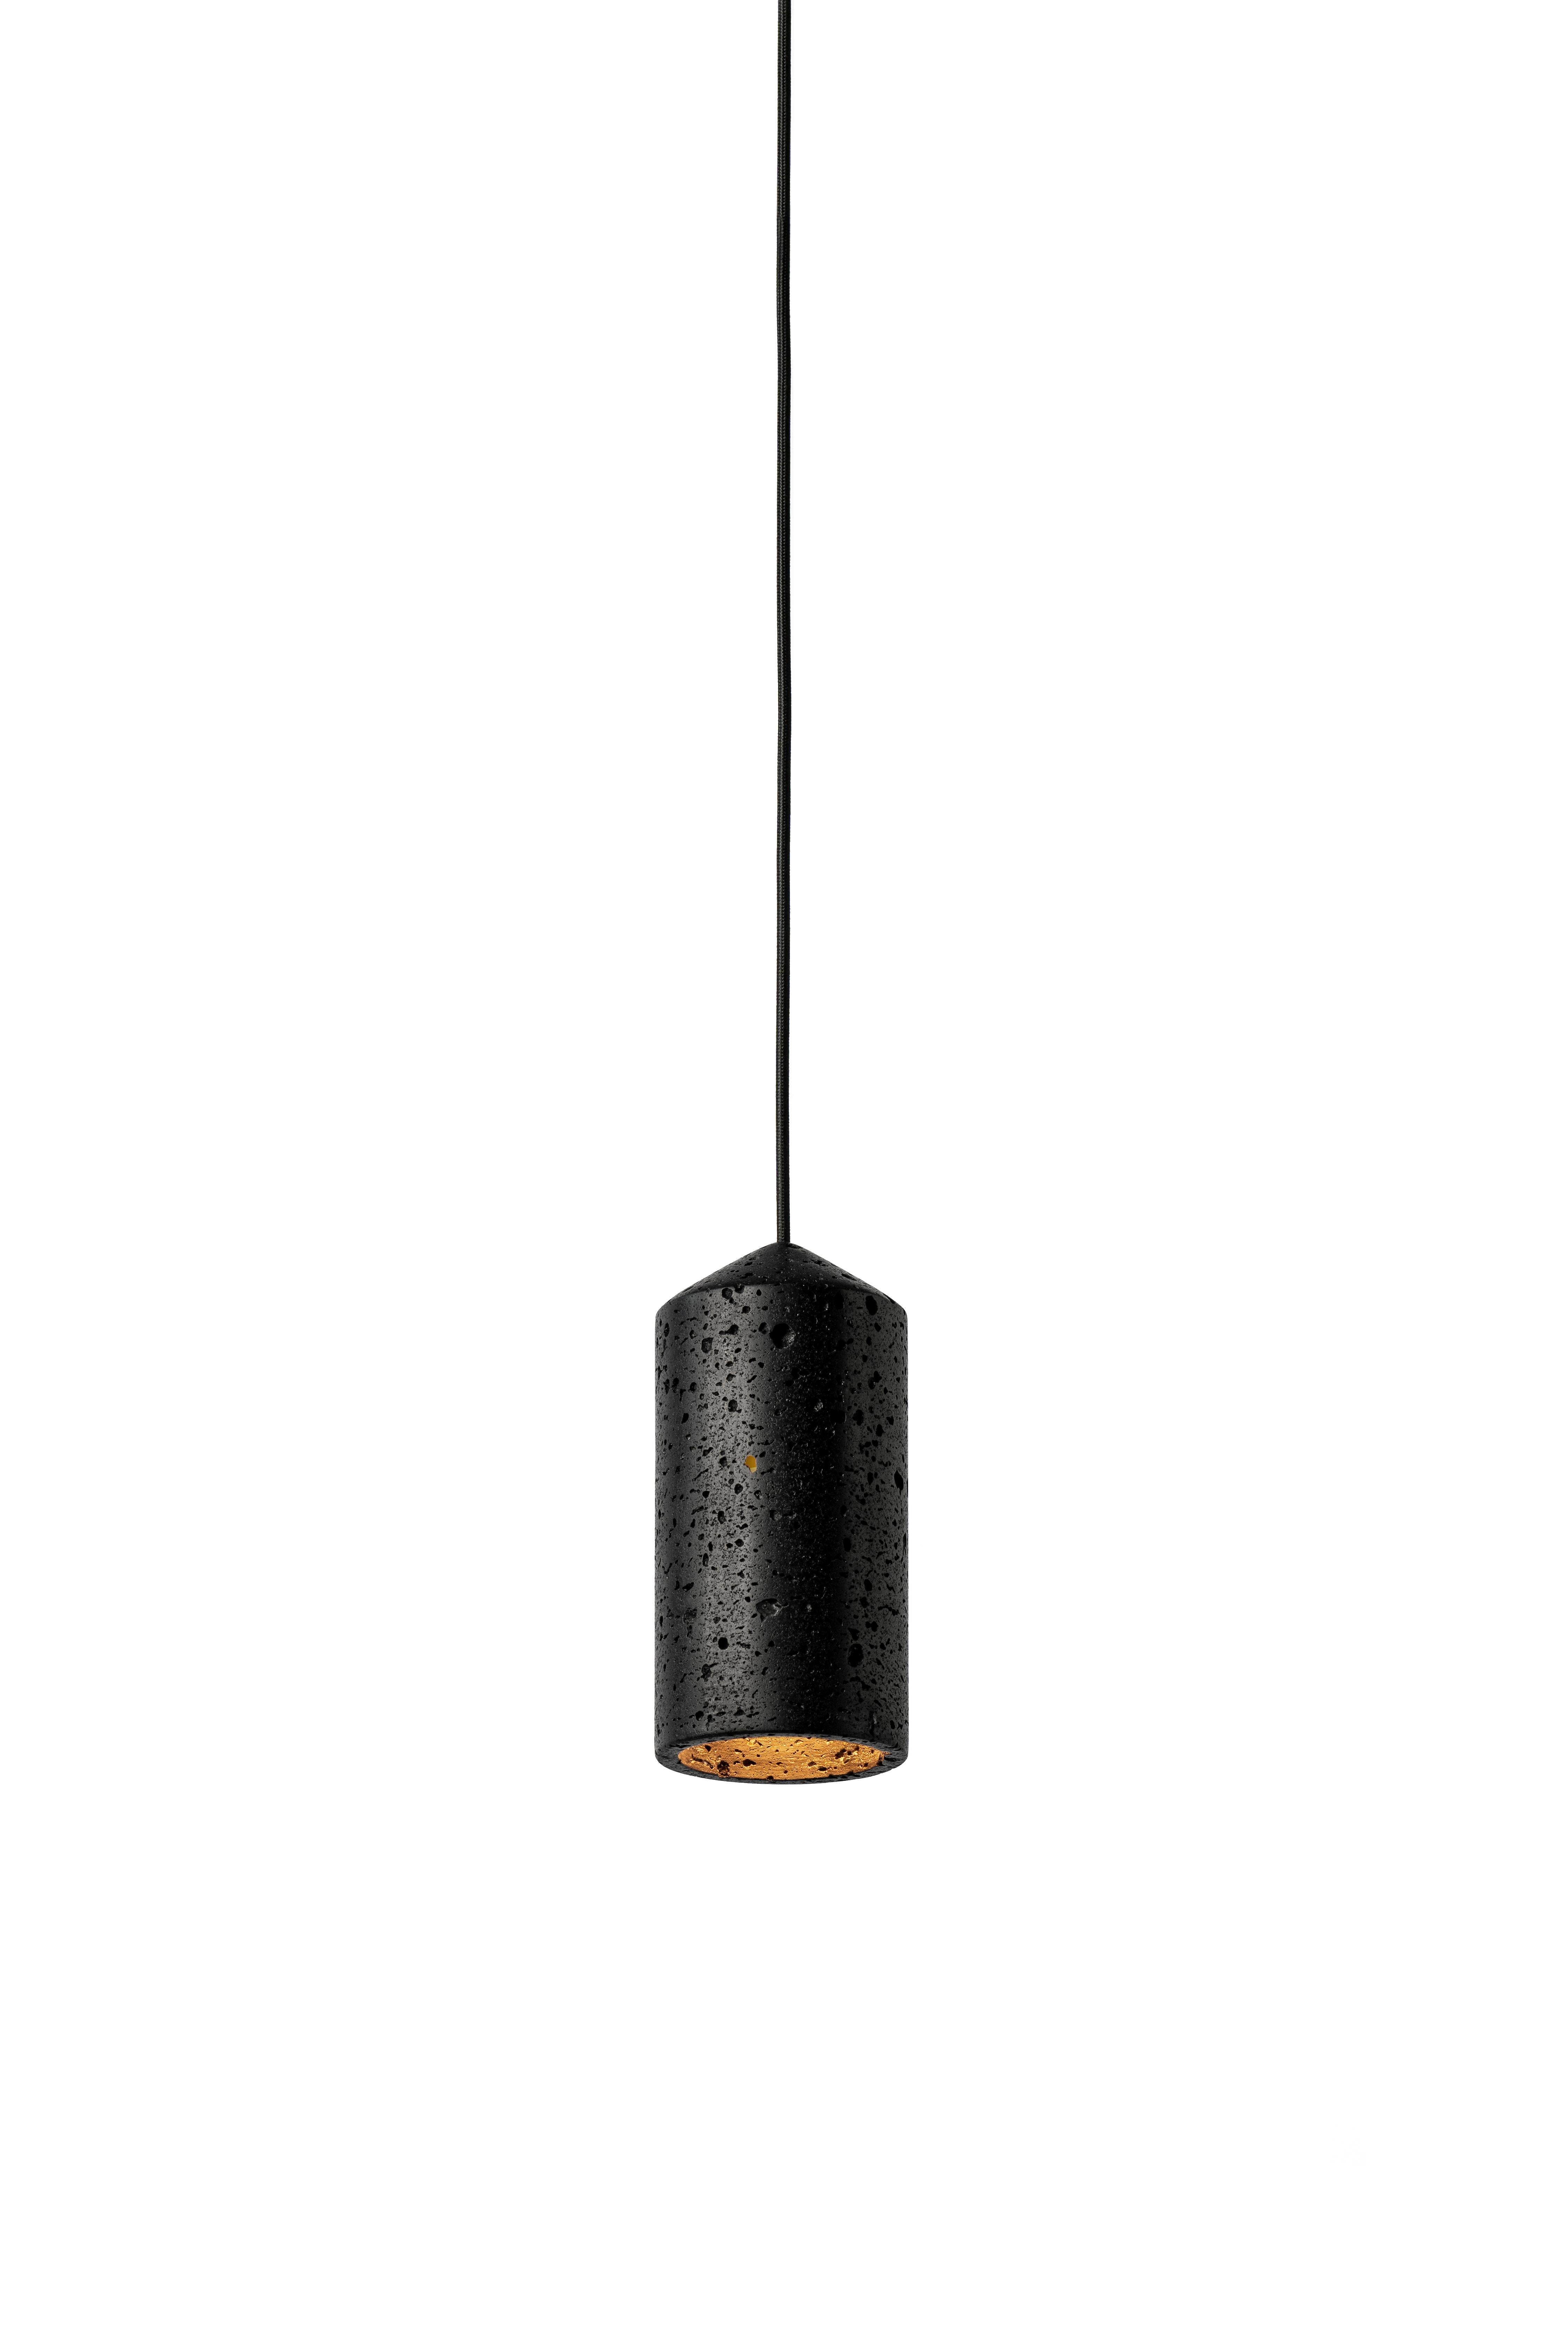 Pendant lamp 'IN' by Buzao x Bentu design.
Black lava stone

Measures: 23 cm high, 11 cm diameter
Wire: 2 meters black (adjustable) 
Lamp type: E27 LED 3W 100-240V 80Ra 200LM 2700K - Comptable with US electric system.
Ceiling rose: 6.5cm diameter